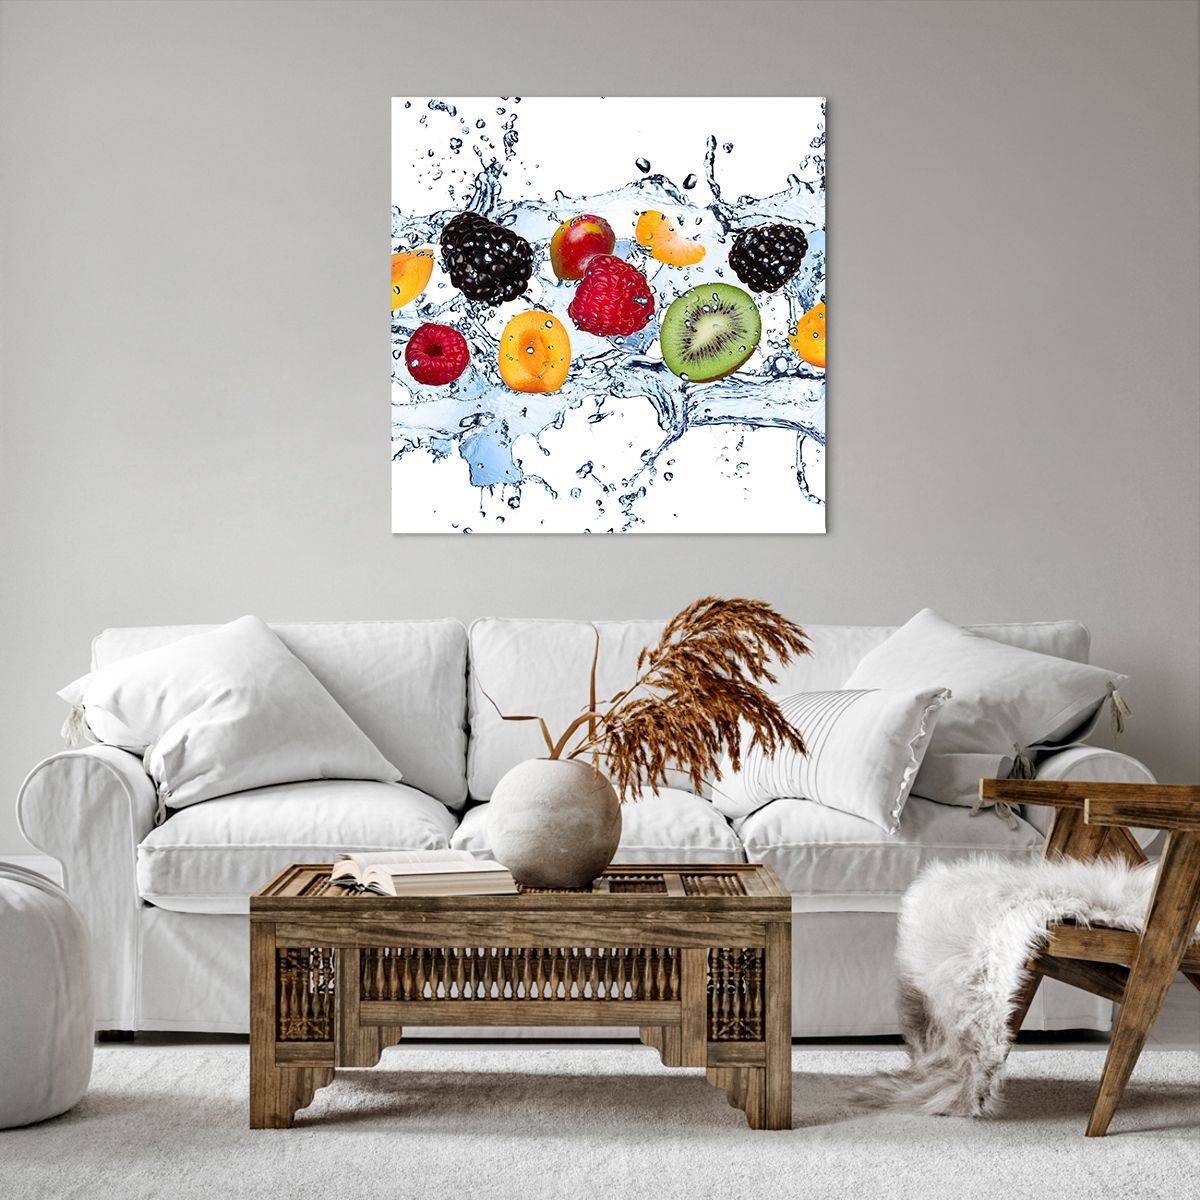 Canvas picture Fruit, Canvas picture Abstraction, Canvas picture 3D, Canvas picture Graphics, Canvas picture Water